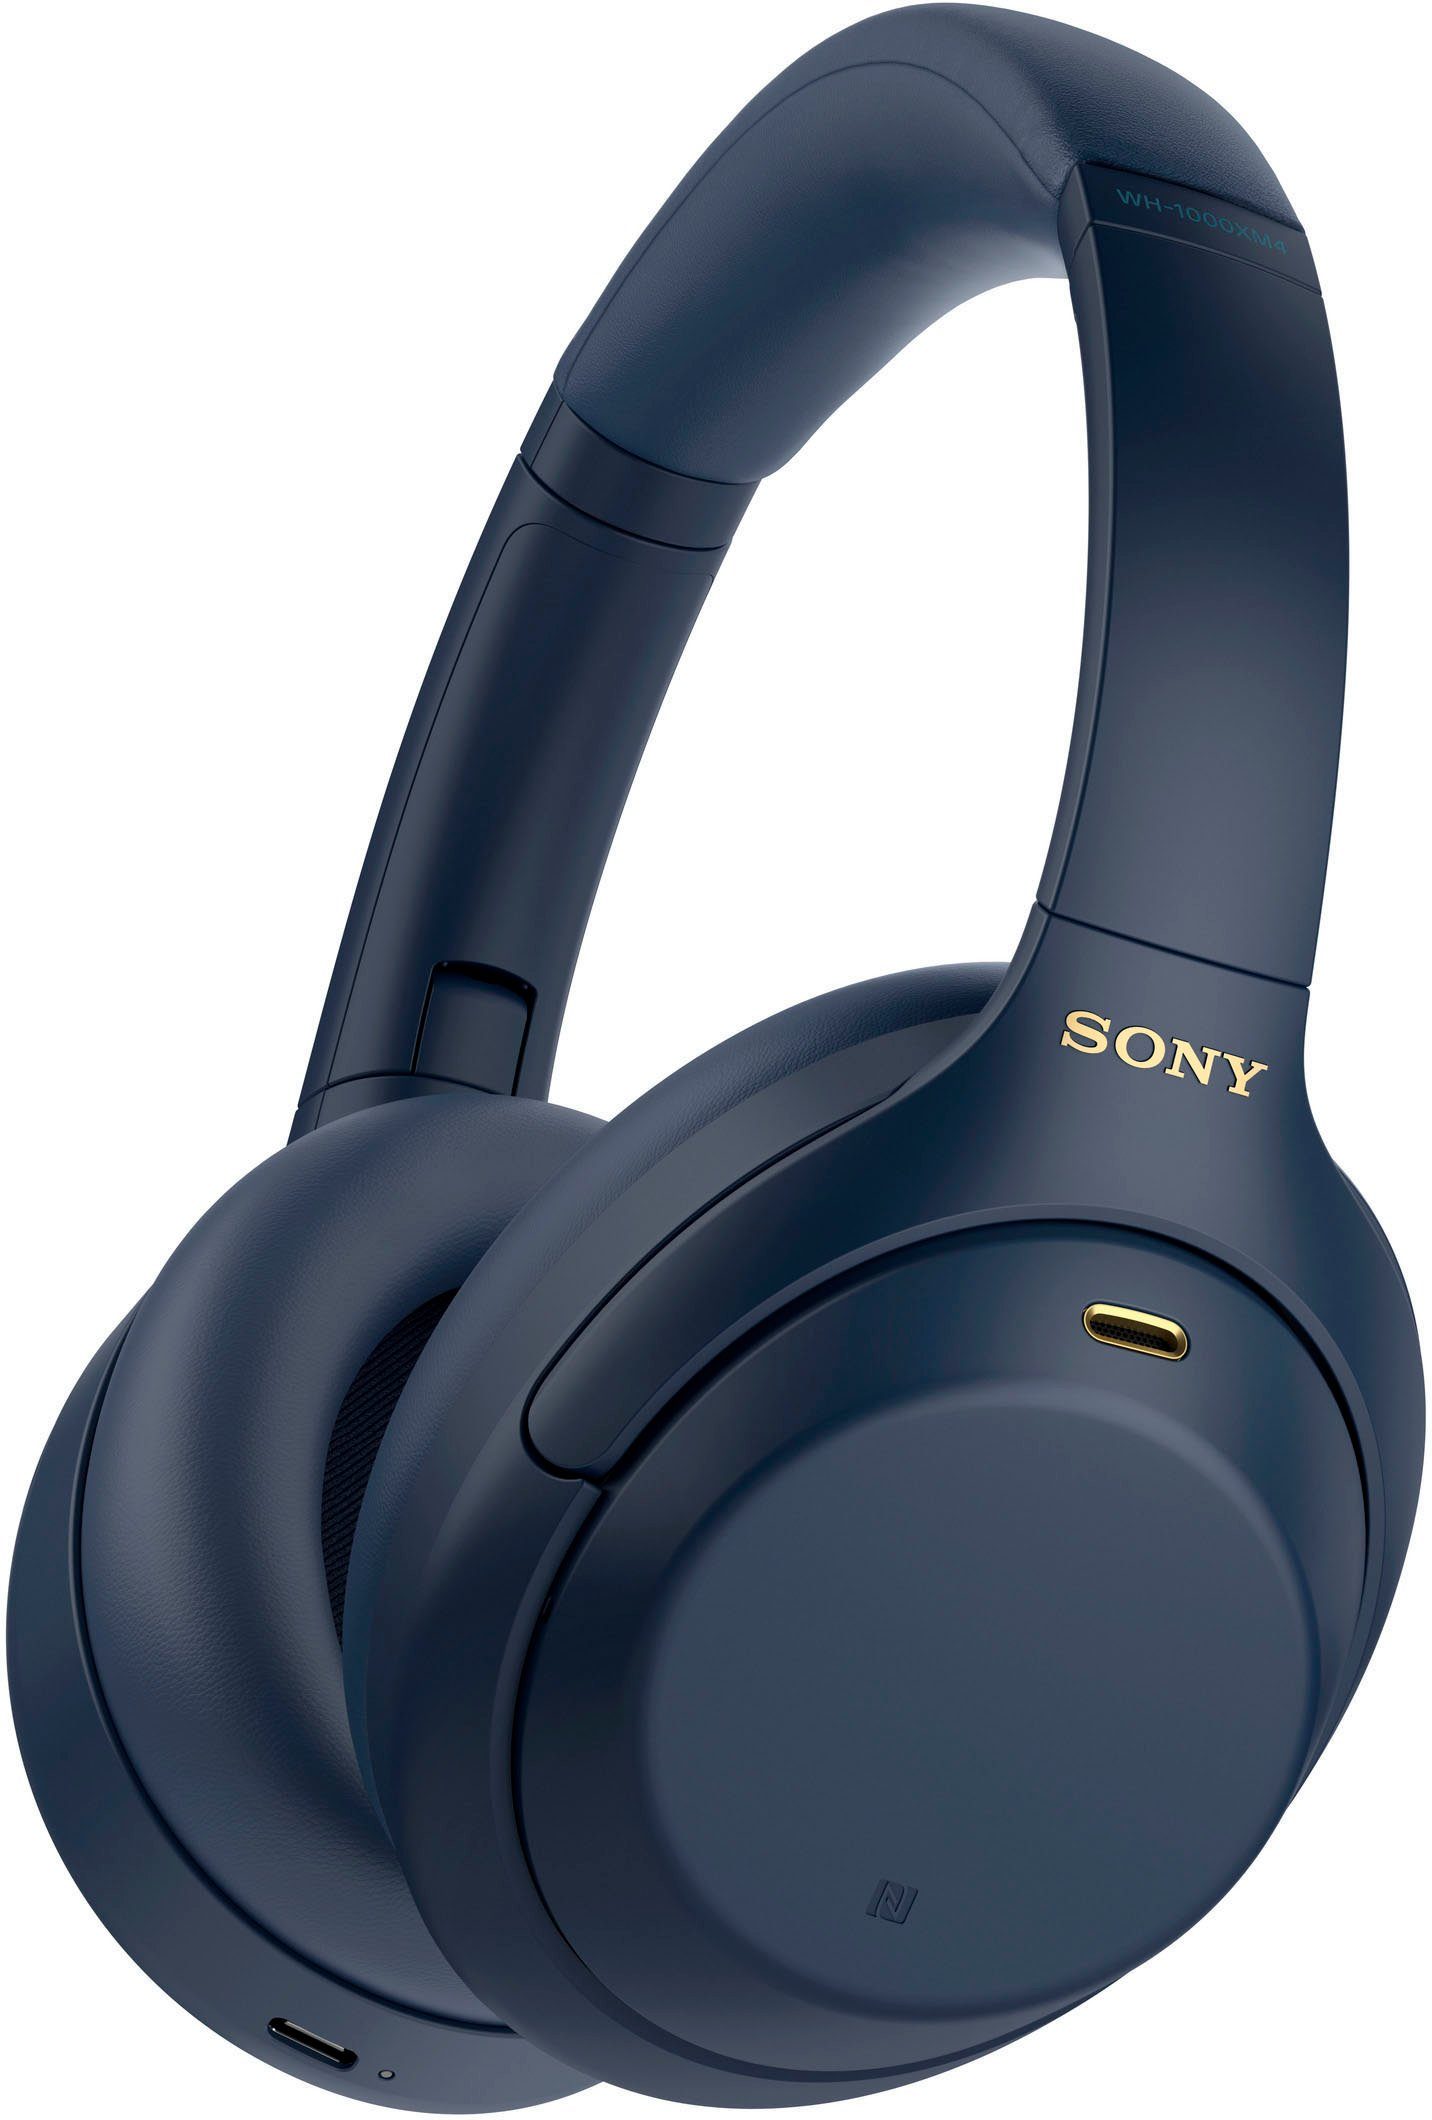 geringster Preis WH-1000XM4 NFC, Sony kabelloser Bluetooth, Touch Verbindung One-Touch Sensor, blau Over-Ear-Kopfhörer (Noise-Cancelling, NFC, via Schnellladefunktion)